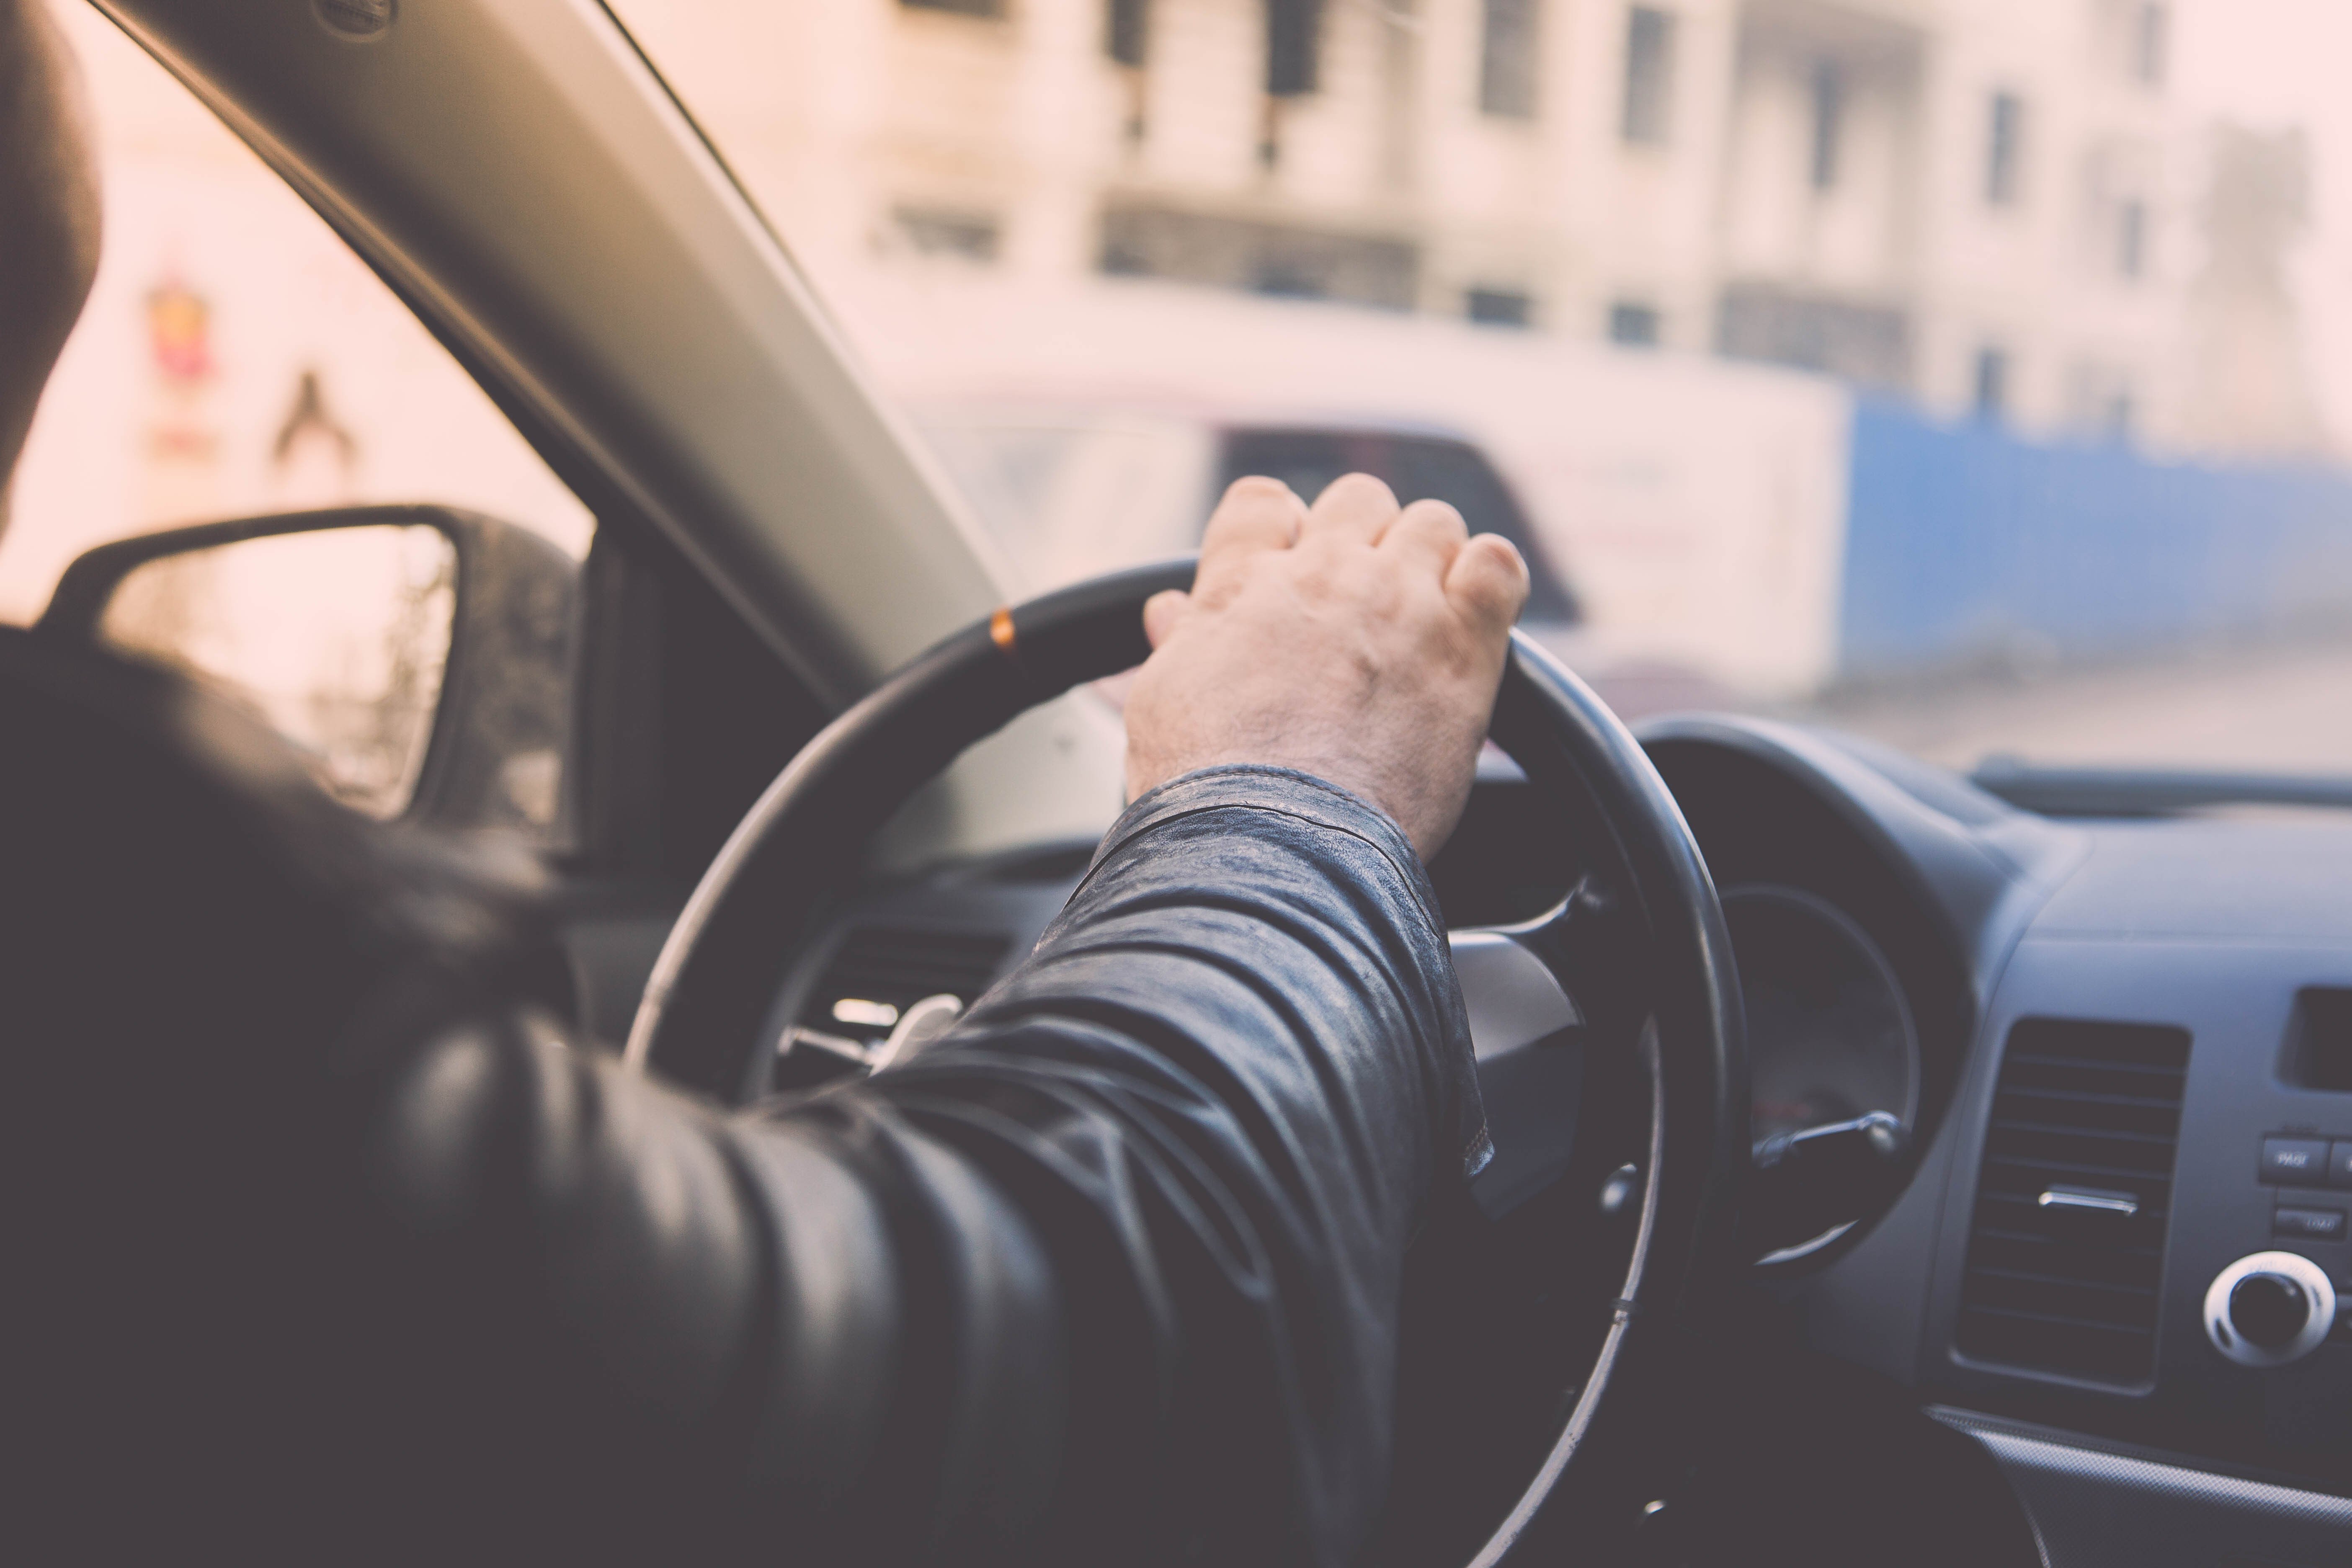 Man driving car, hand on steering wheel, looking at the road | Photo: Shutterstock.com